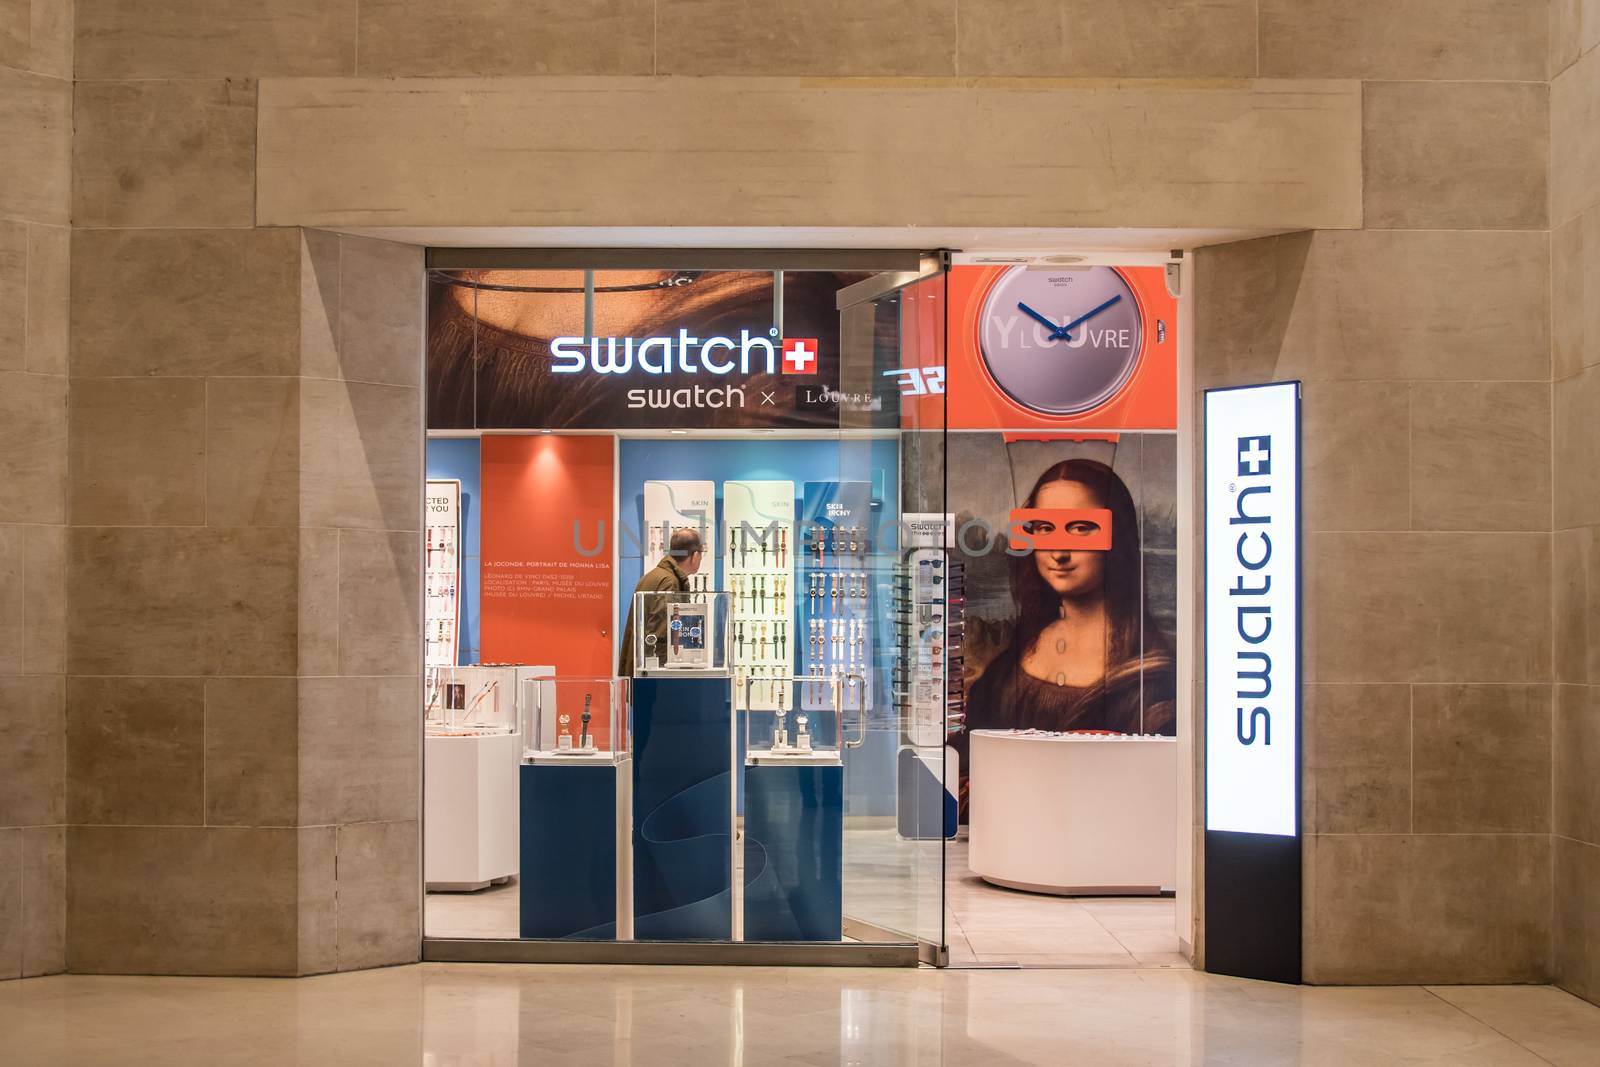 Swatch Store in Paris, France, watches brand shop in "Le Louvre" by ontheroadagain